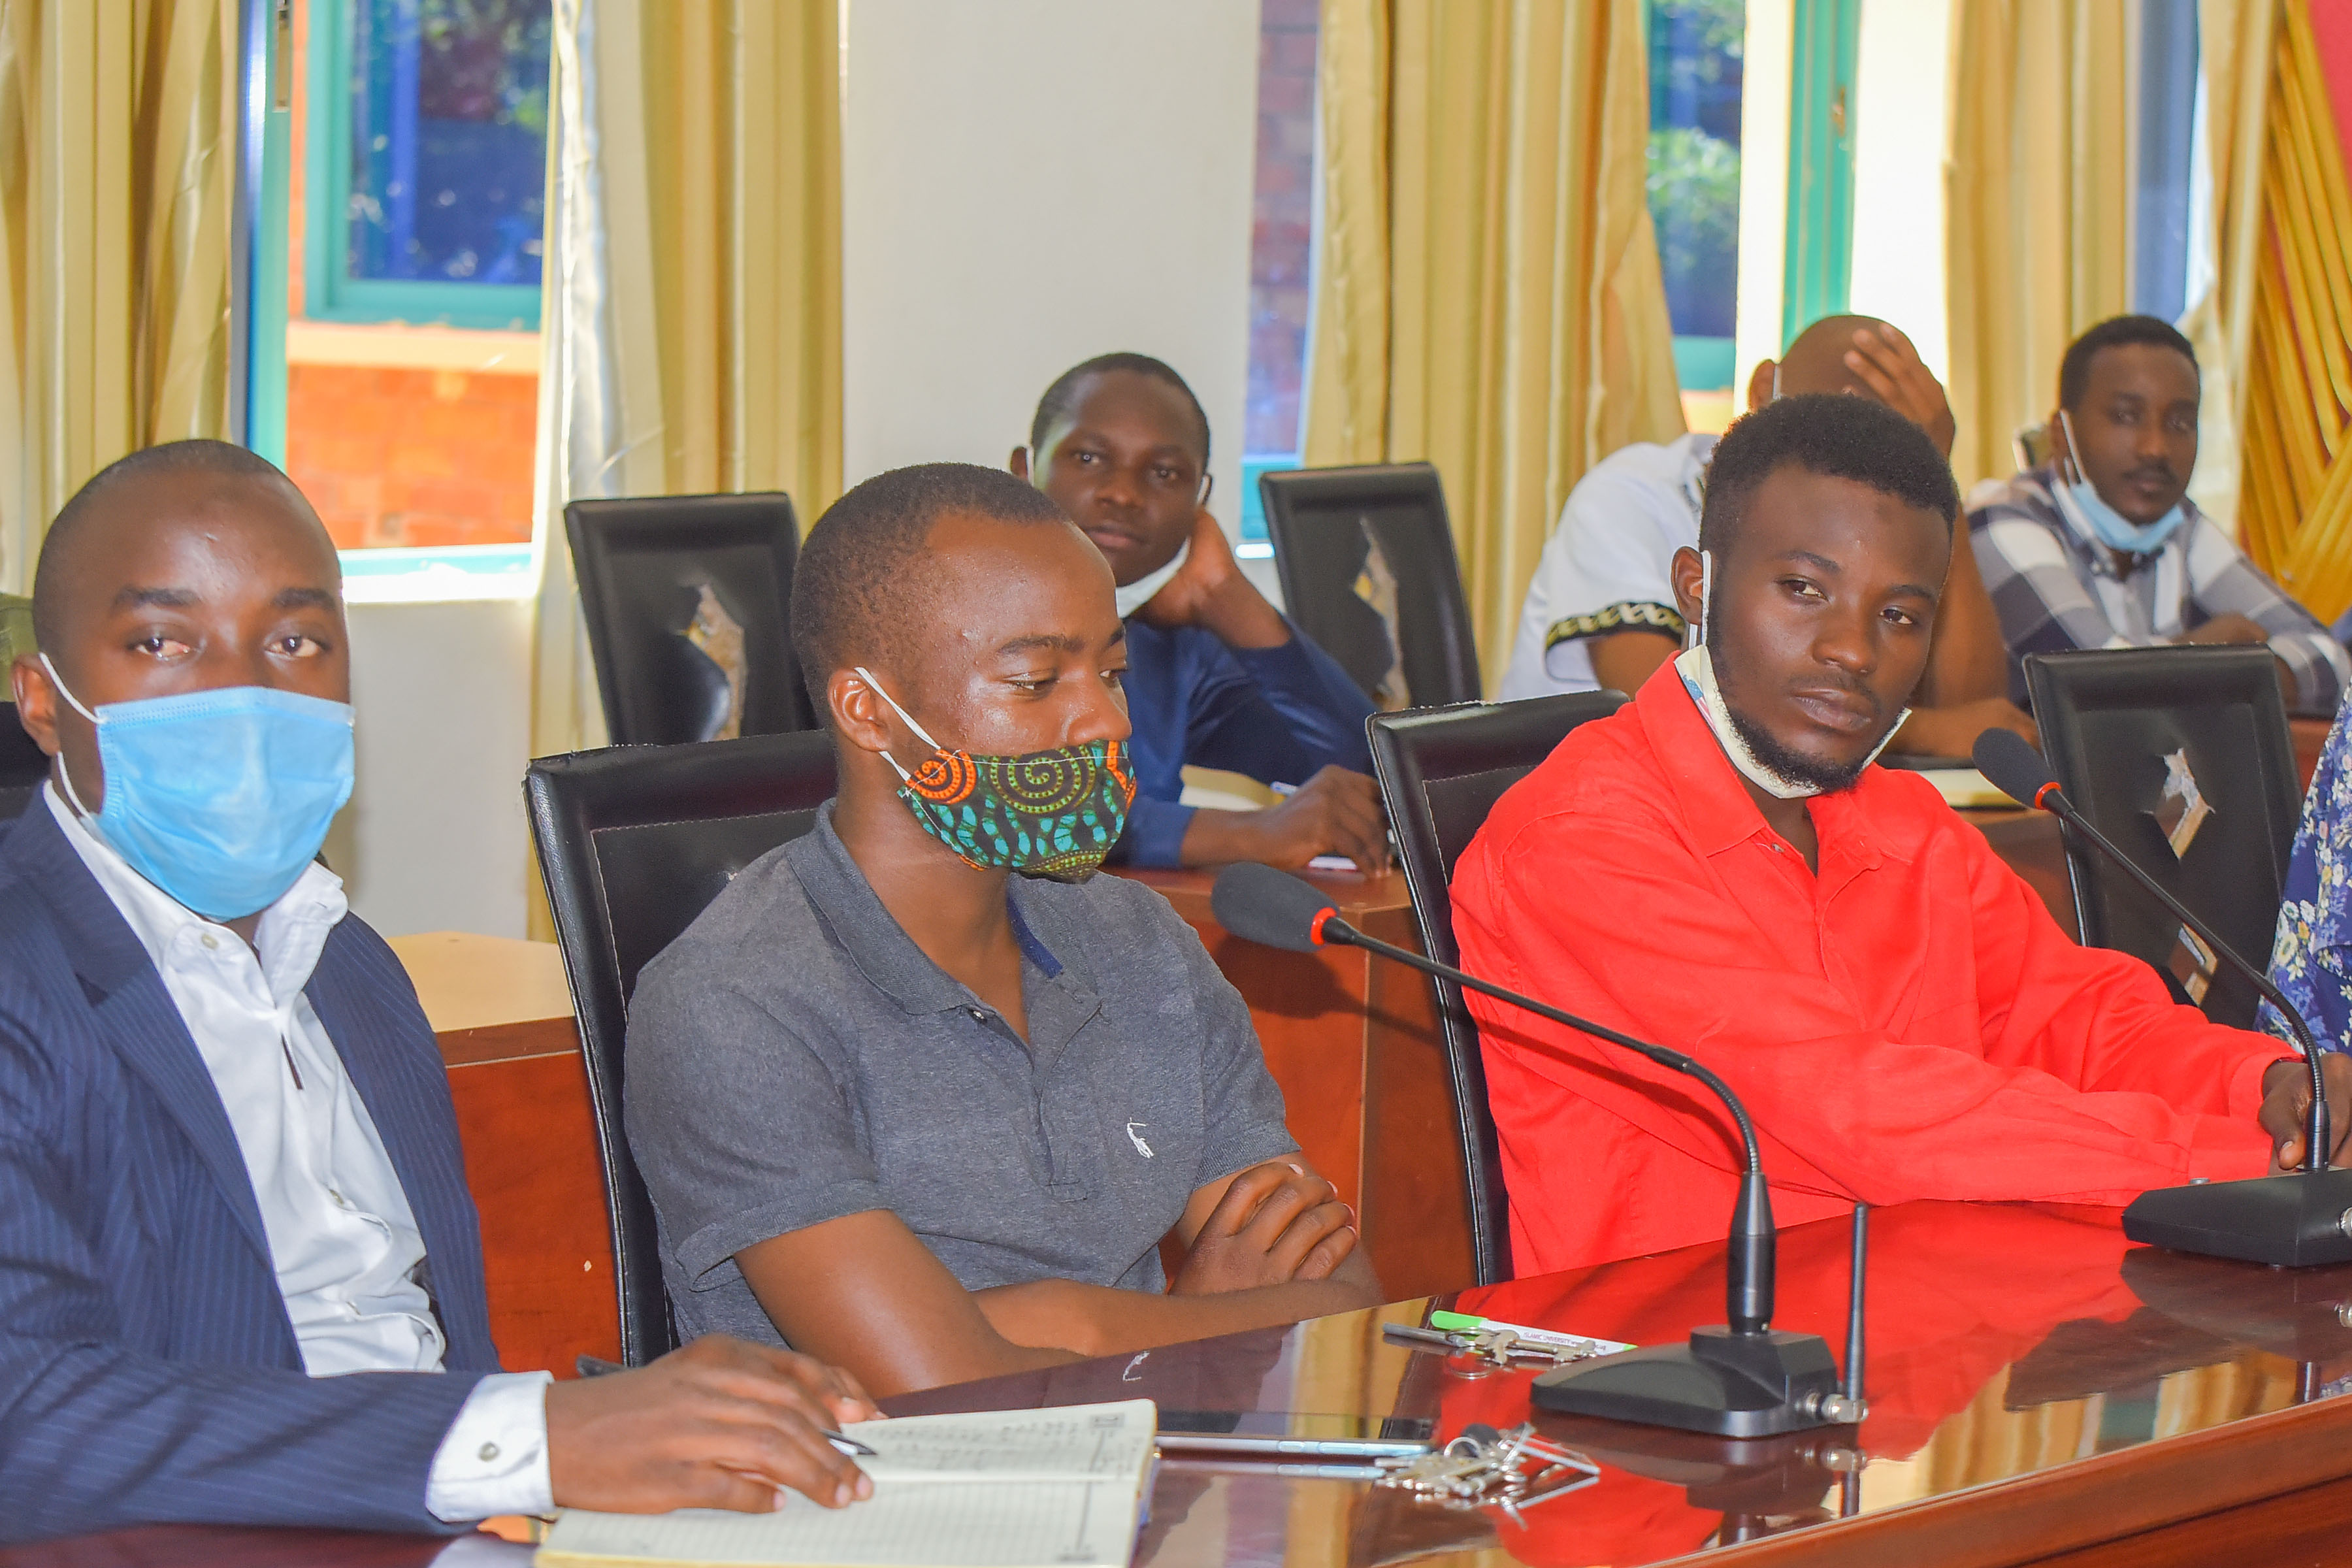 A section of the student leaders attentively listens to the VRFA during the meeting at the university board romm